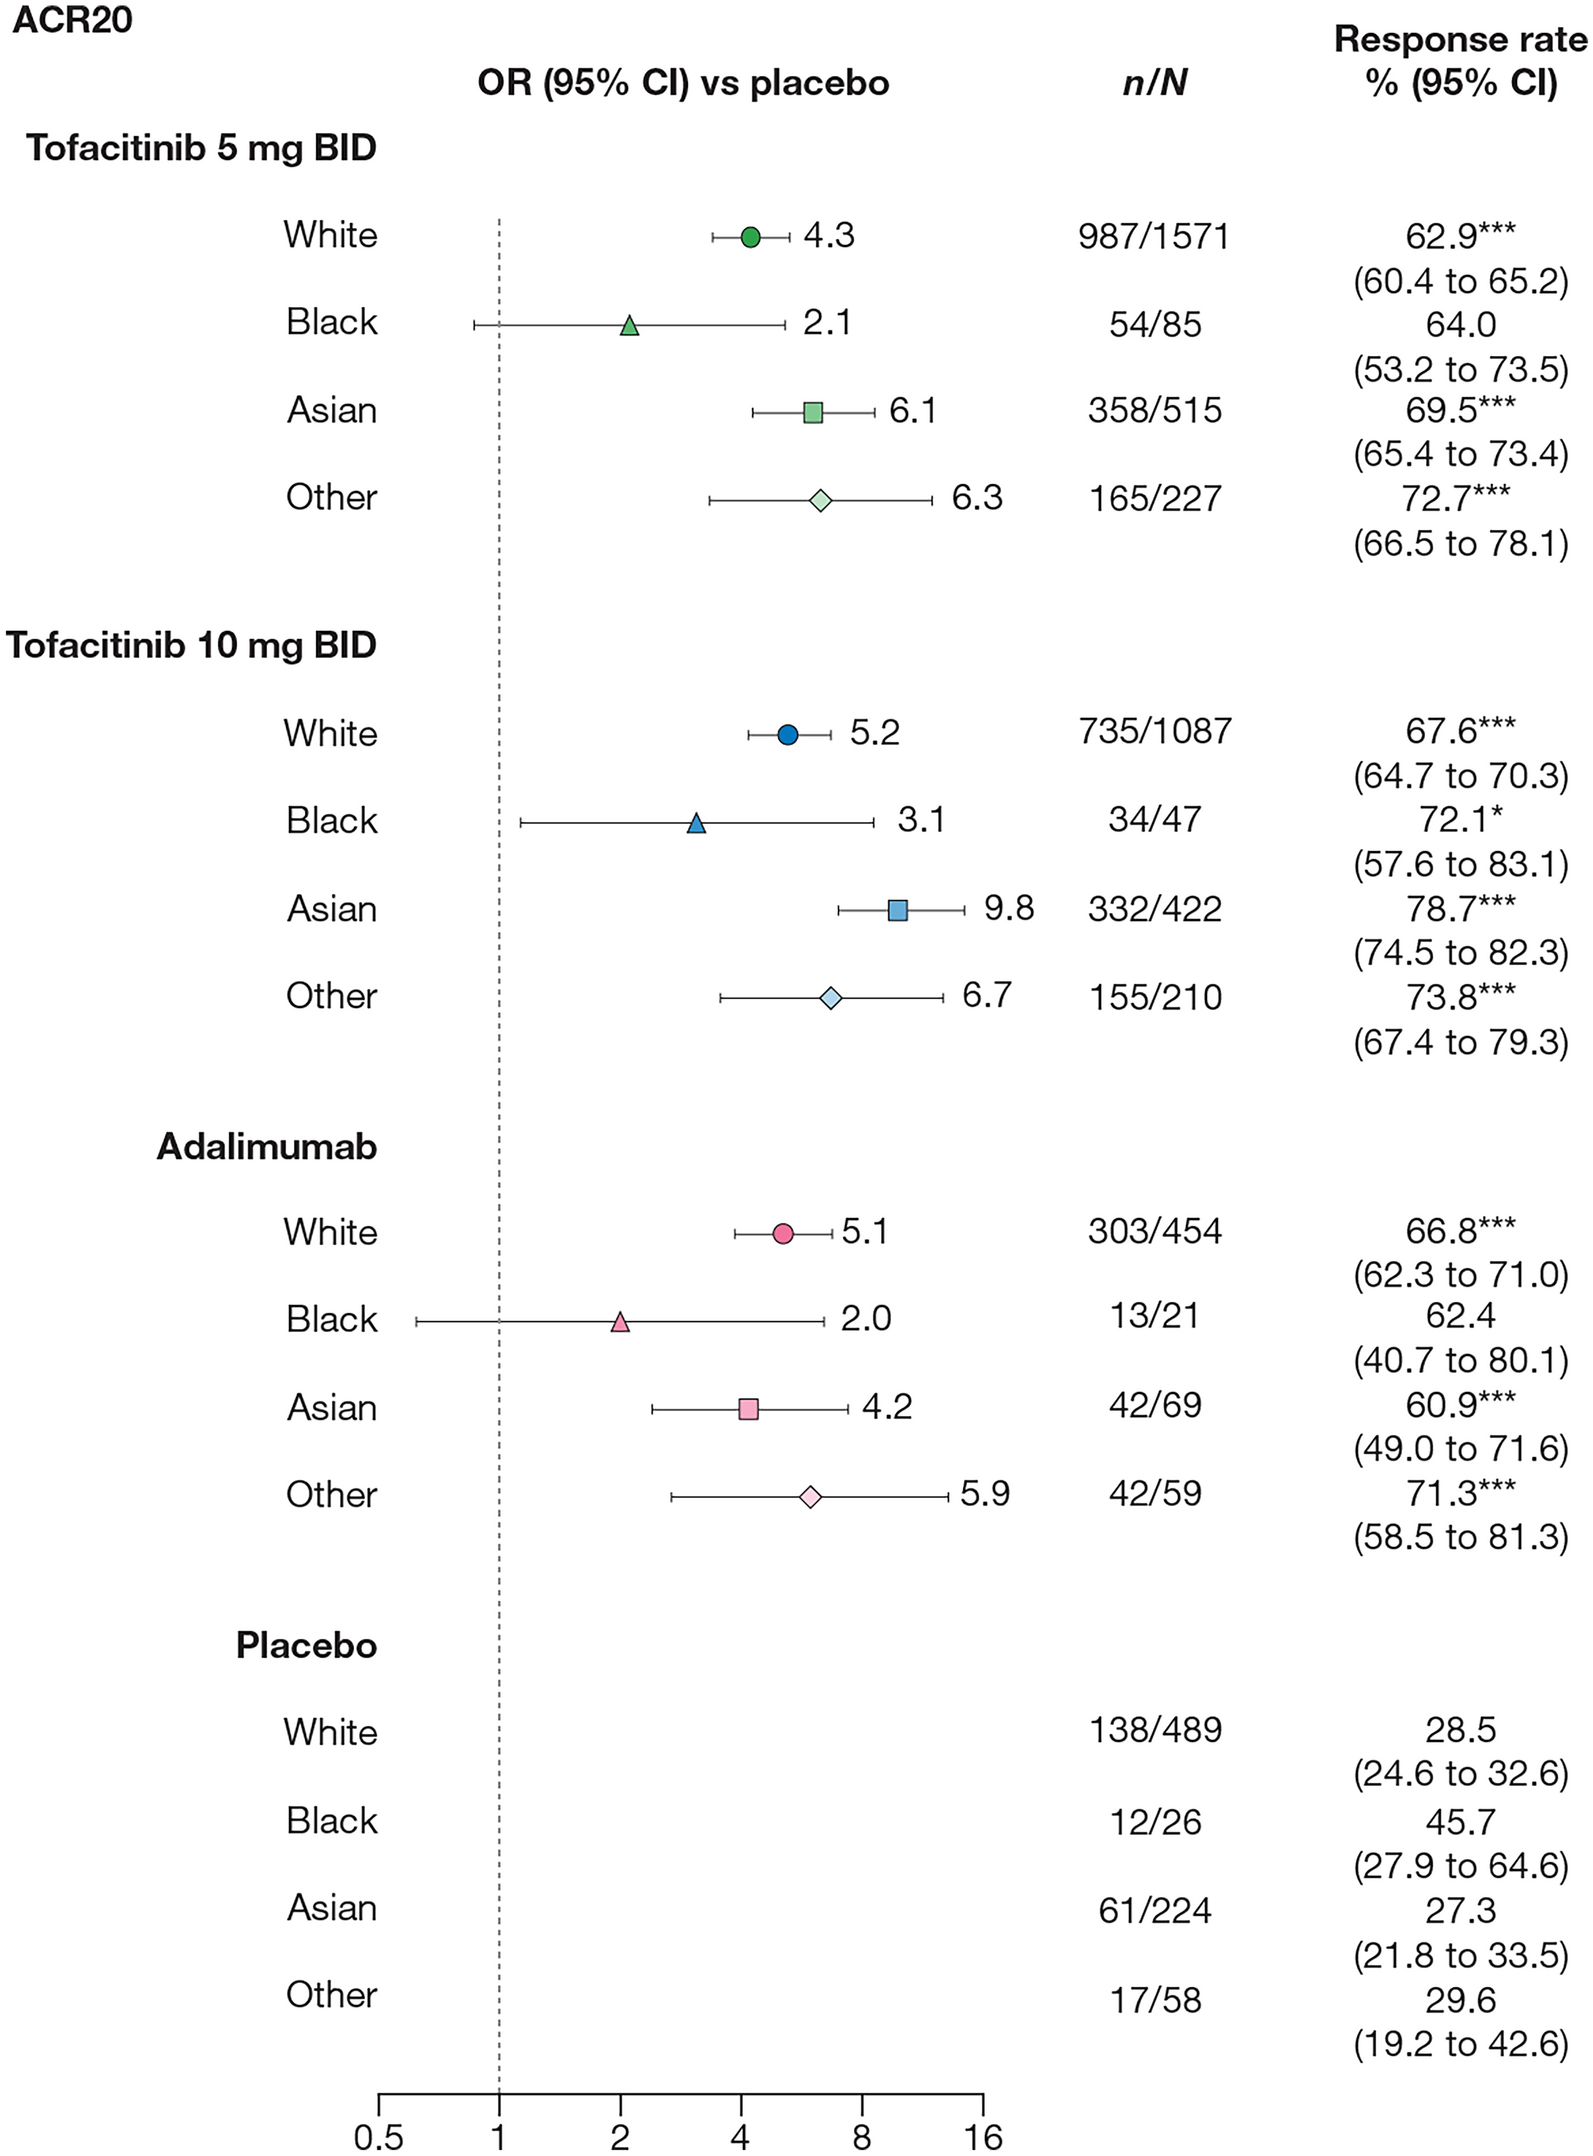 Impact of Race on the Efficacy and Safety of Tofacitinib in Rheumatoid Arthritis: Post Hoc Analysis of Pooled Clinical Trials